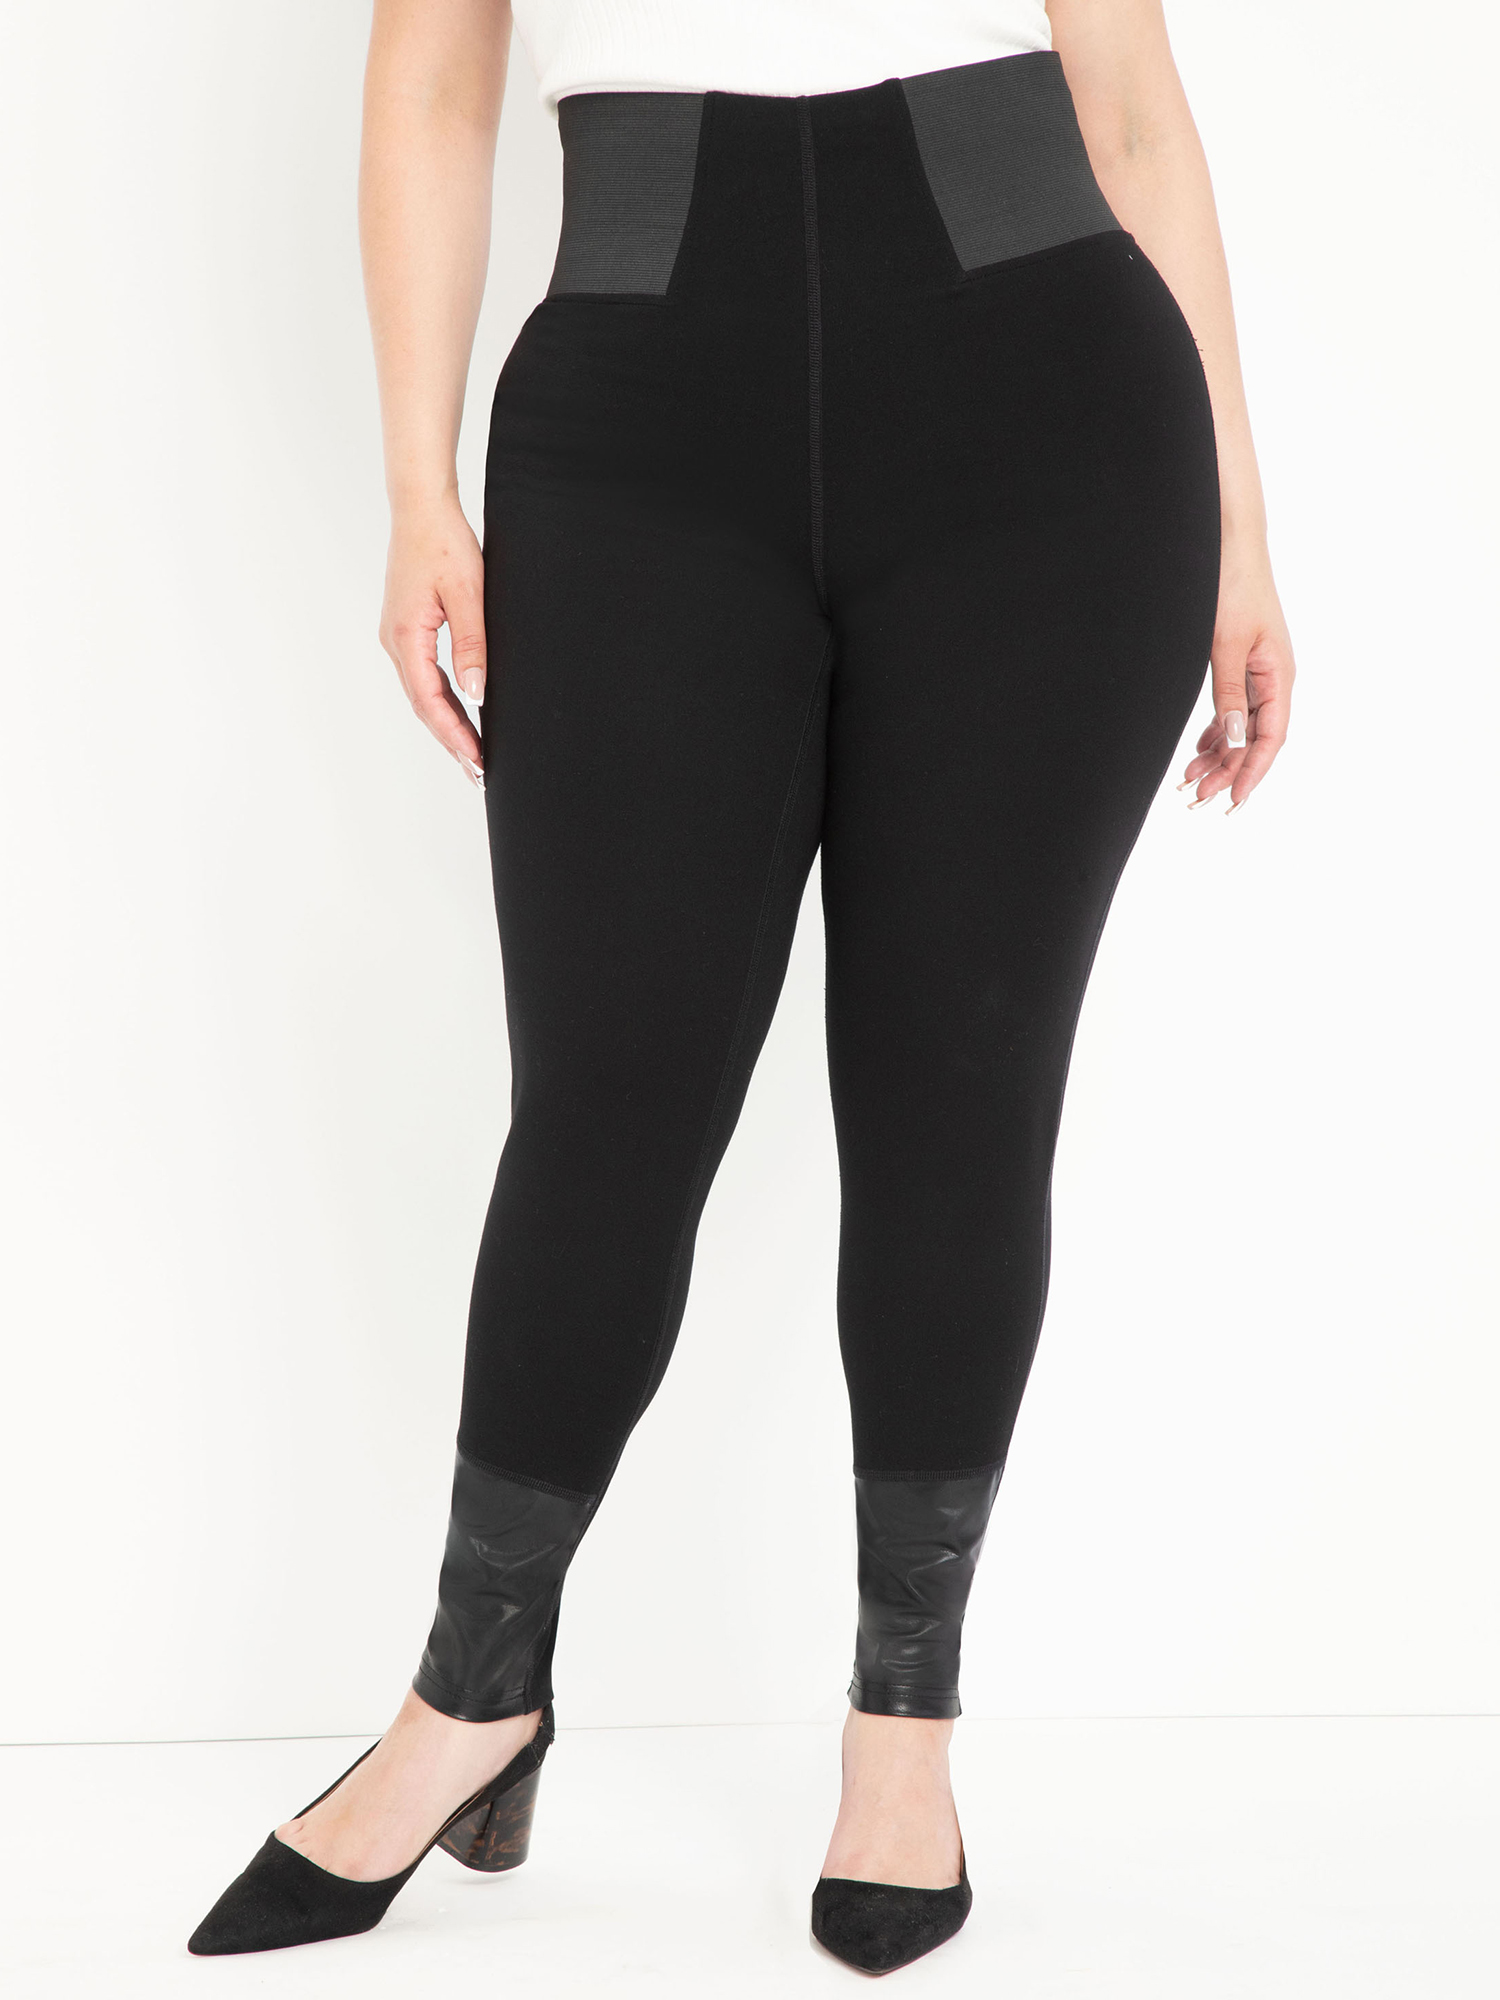 ELOQUII Elements Women's Plus Size Ponte Leggings with Faux Leather Detail - image 1 of 3